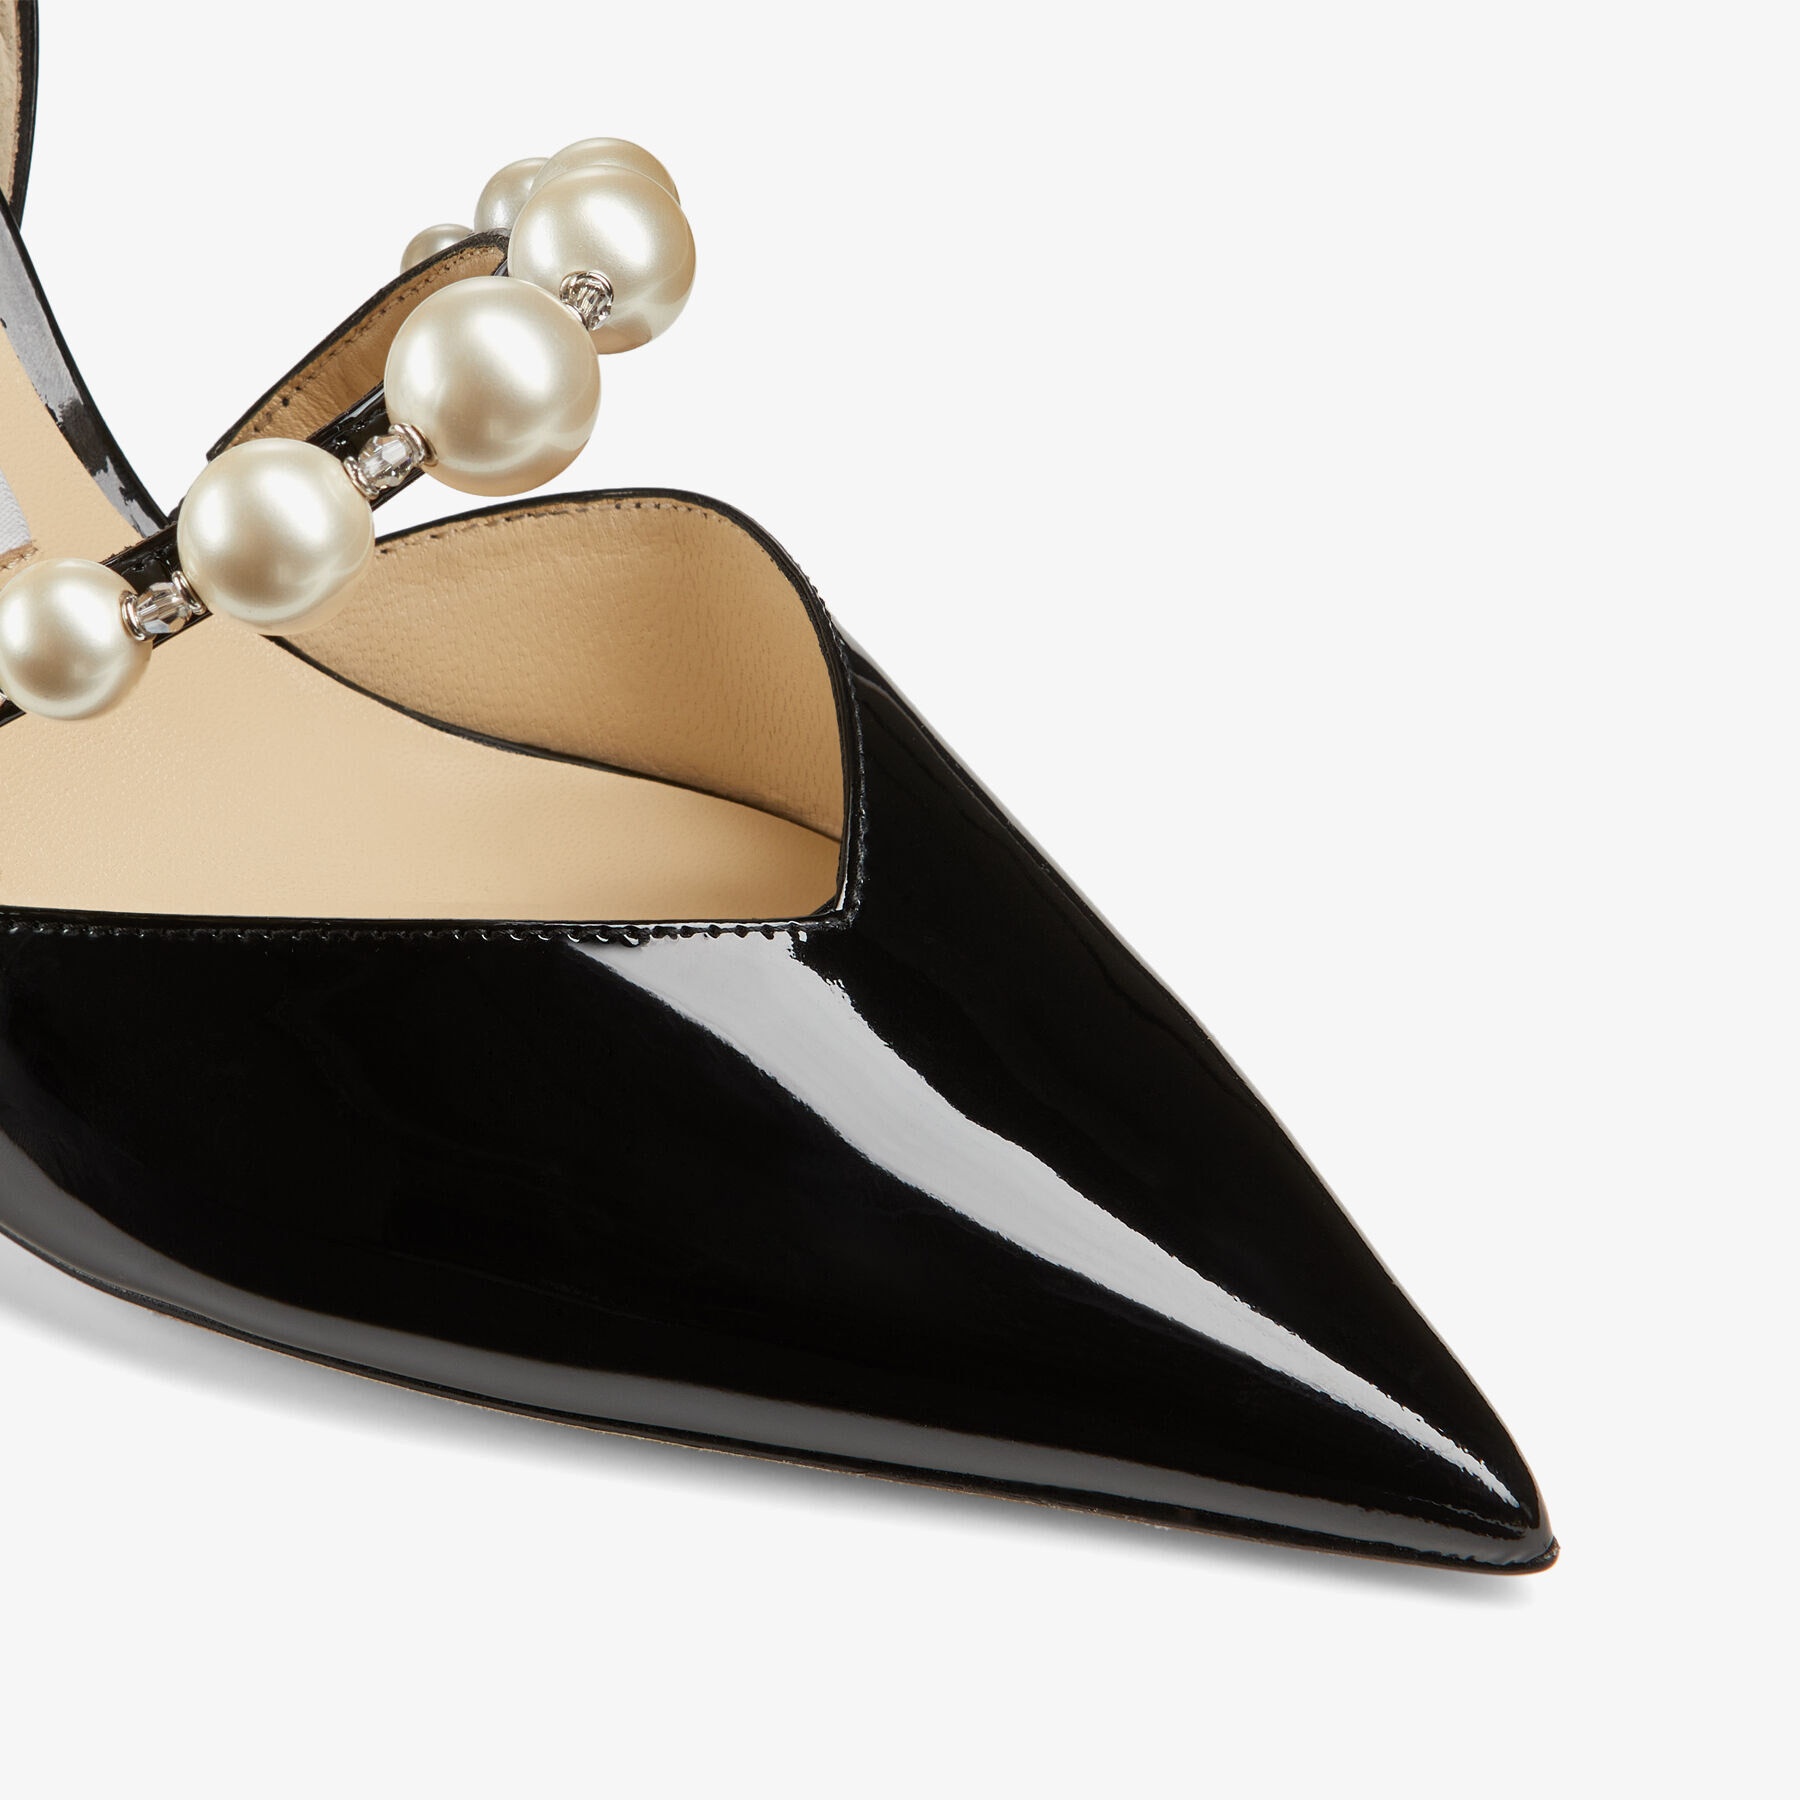 Aurelie 85
Black Patent Leather Pointed Pumps with Pearl Embellishment - 4